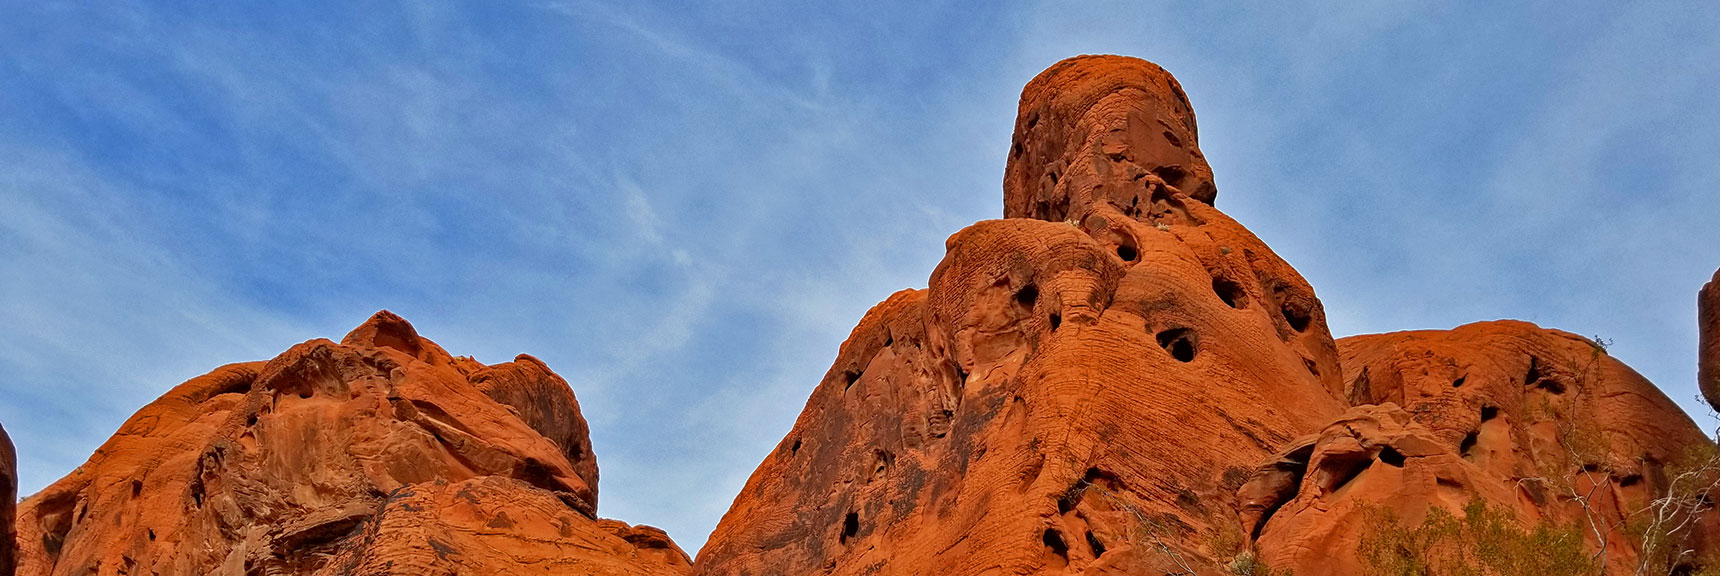 The Fascinating Rock Formations Continue in Fire Canyon in Valley of Fire State Park, Nevada